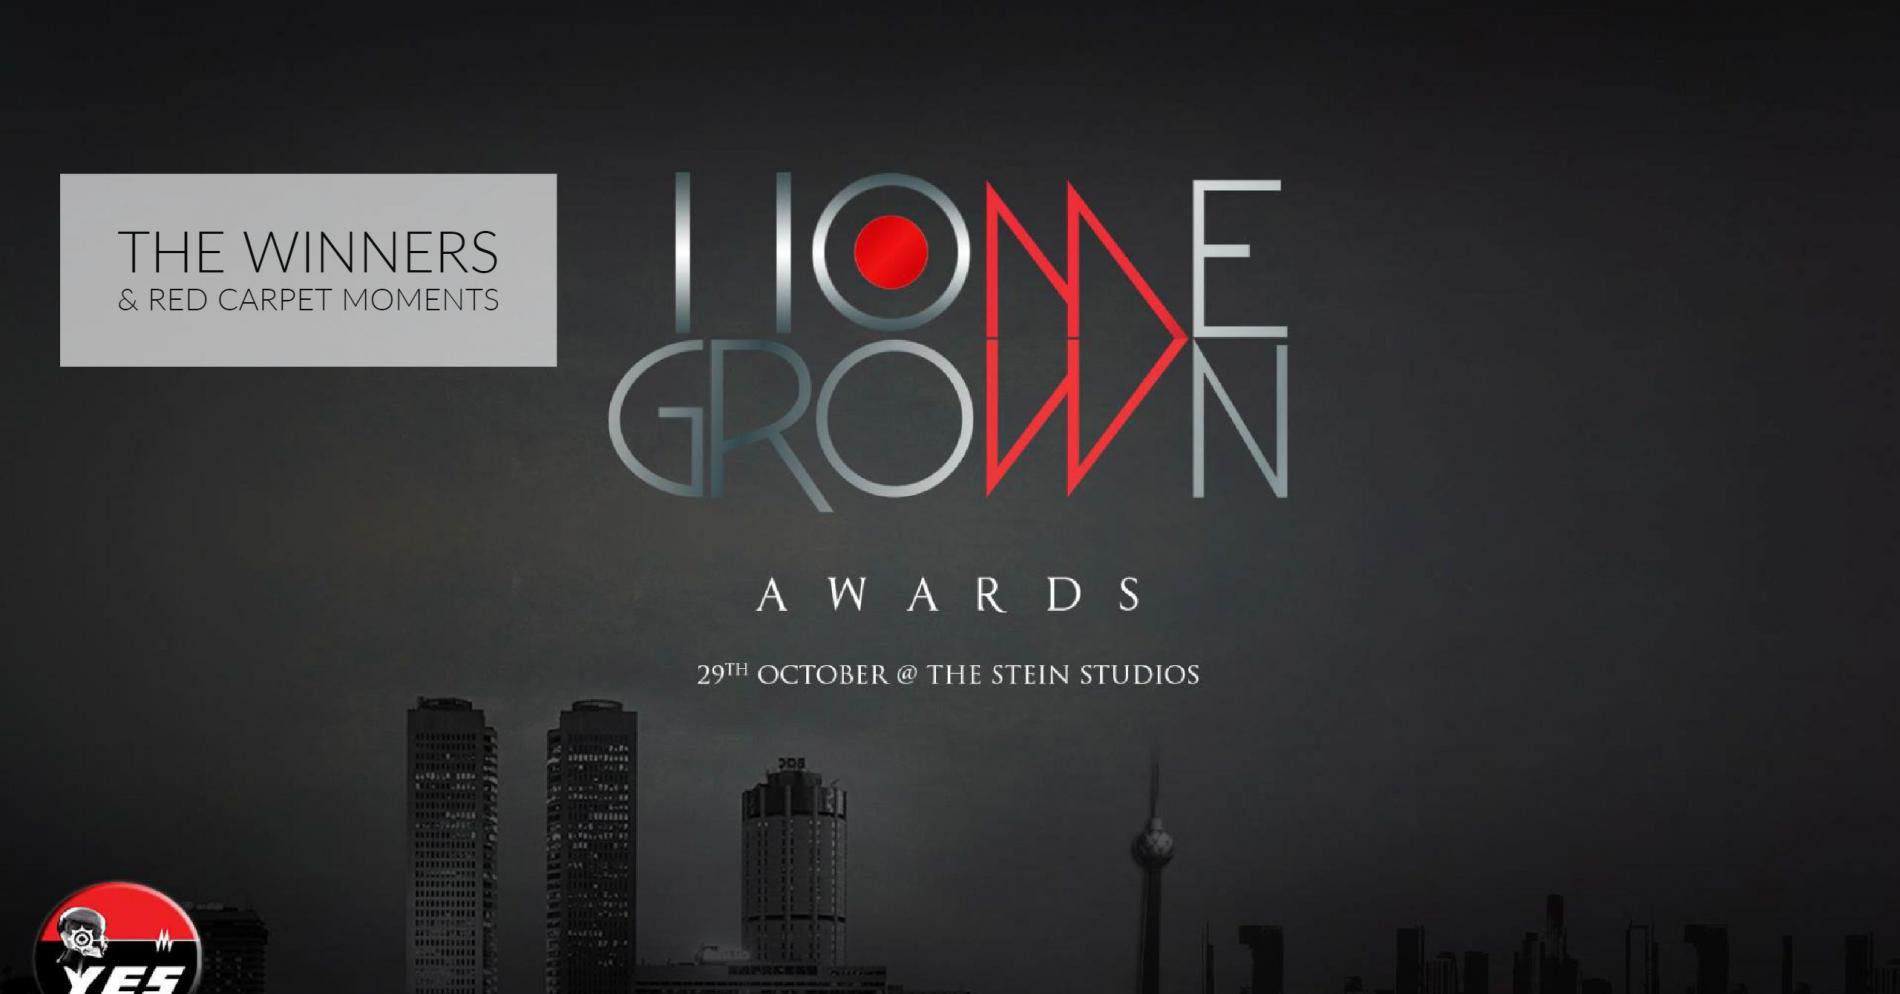 The YES Home Grown Awards 2017 – The Results & Red Carpet Captures